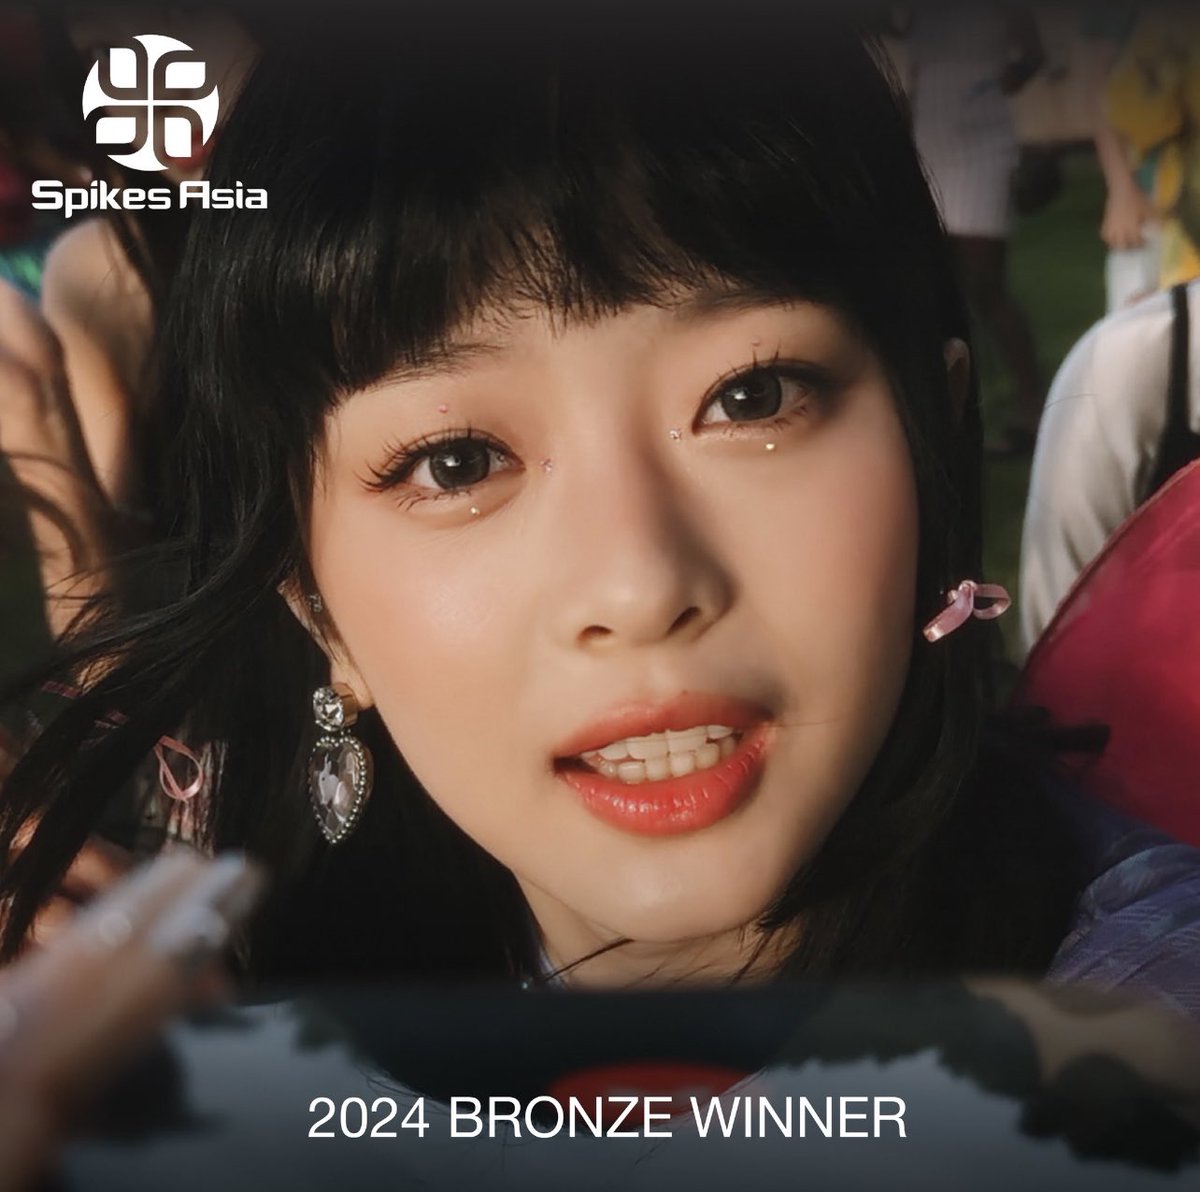 [🏆] @NewJeans_ADOR’s ‘ETA’ Music Video was the Bronze Winner in the ‘Brand or Product Integration into Music Content’ Category at the #SpikesAsia2024 Awards

The Spikes Asia Awards are the most prestigious creative communication awards in the Asia Pacific Region.

#NewJeans…